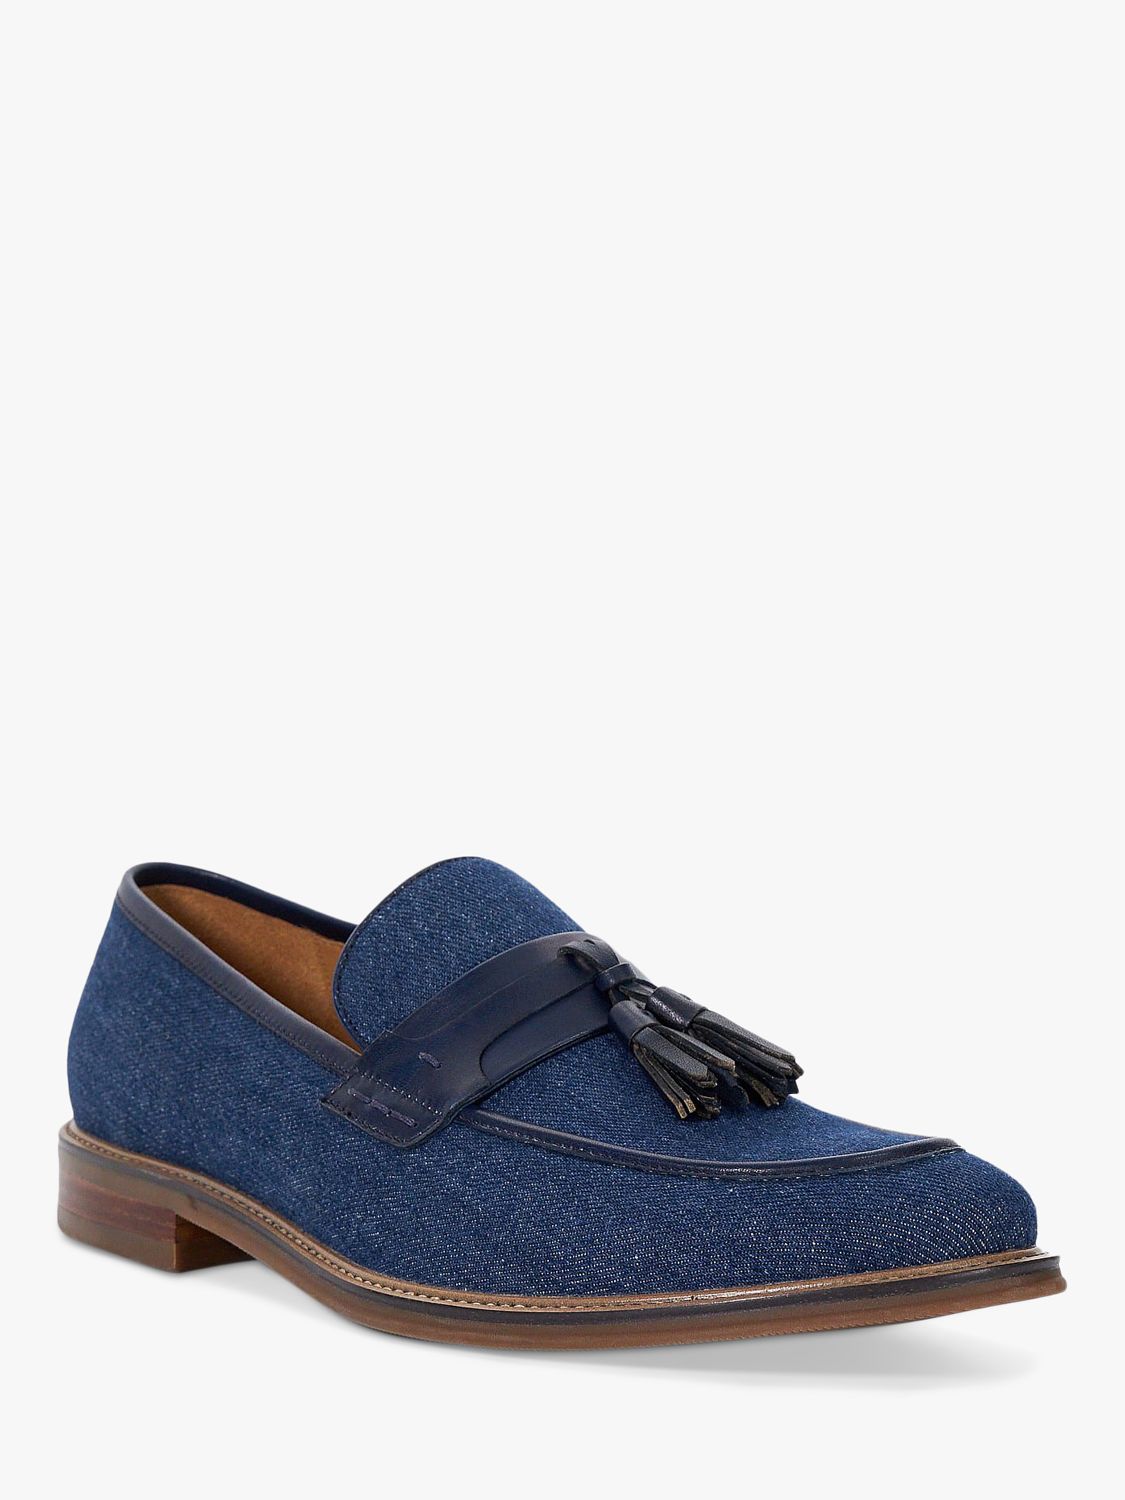 Dune Sought Leather Loafers, Navy, 6